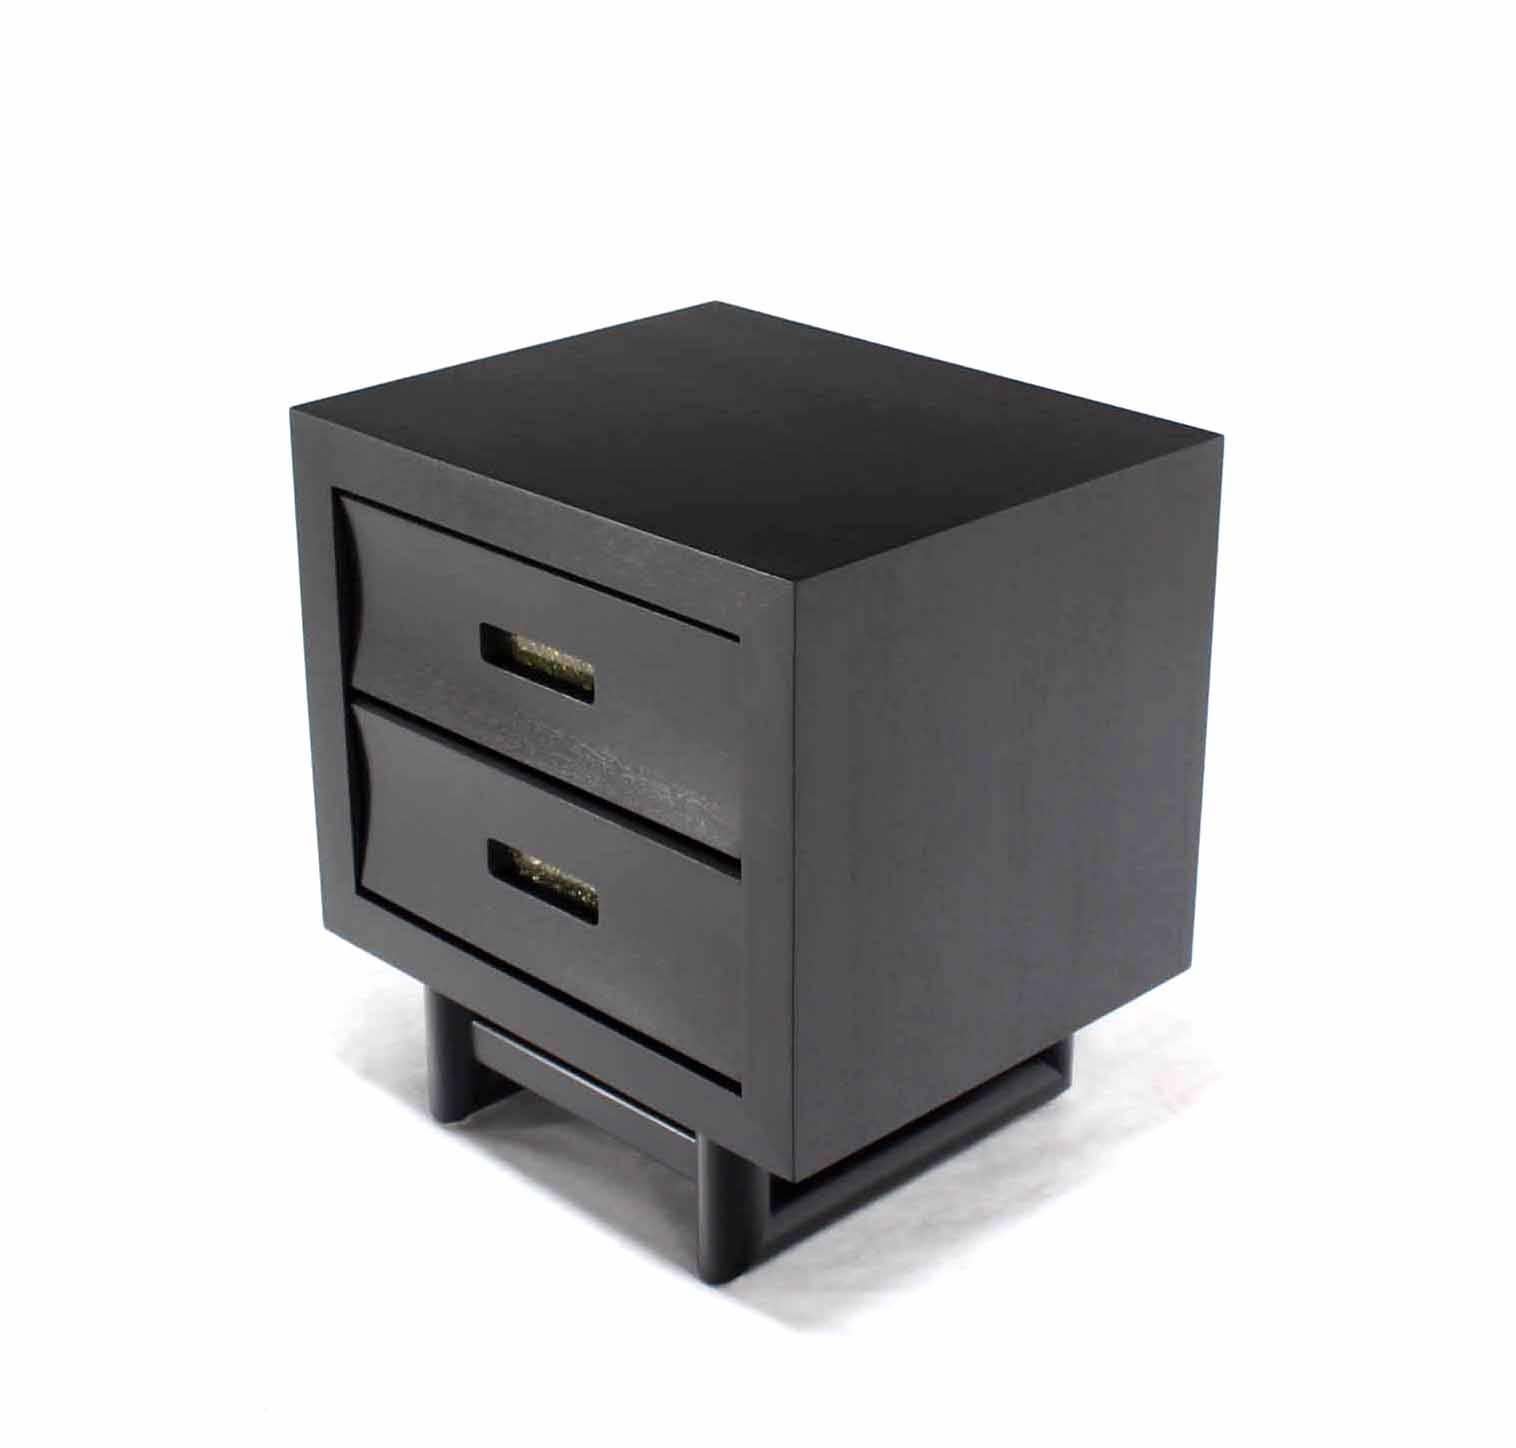 Pair or Mid-Century Modern black lacquer nightstands or end tables.